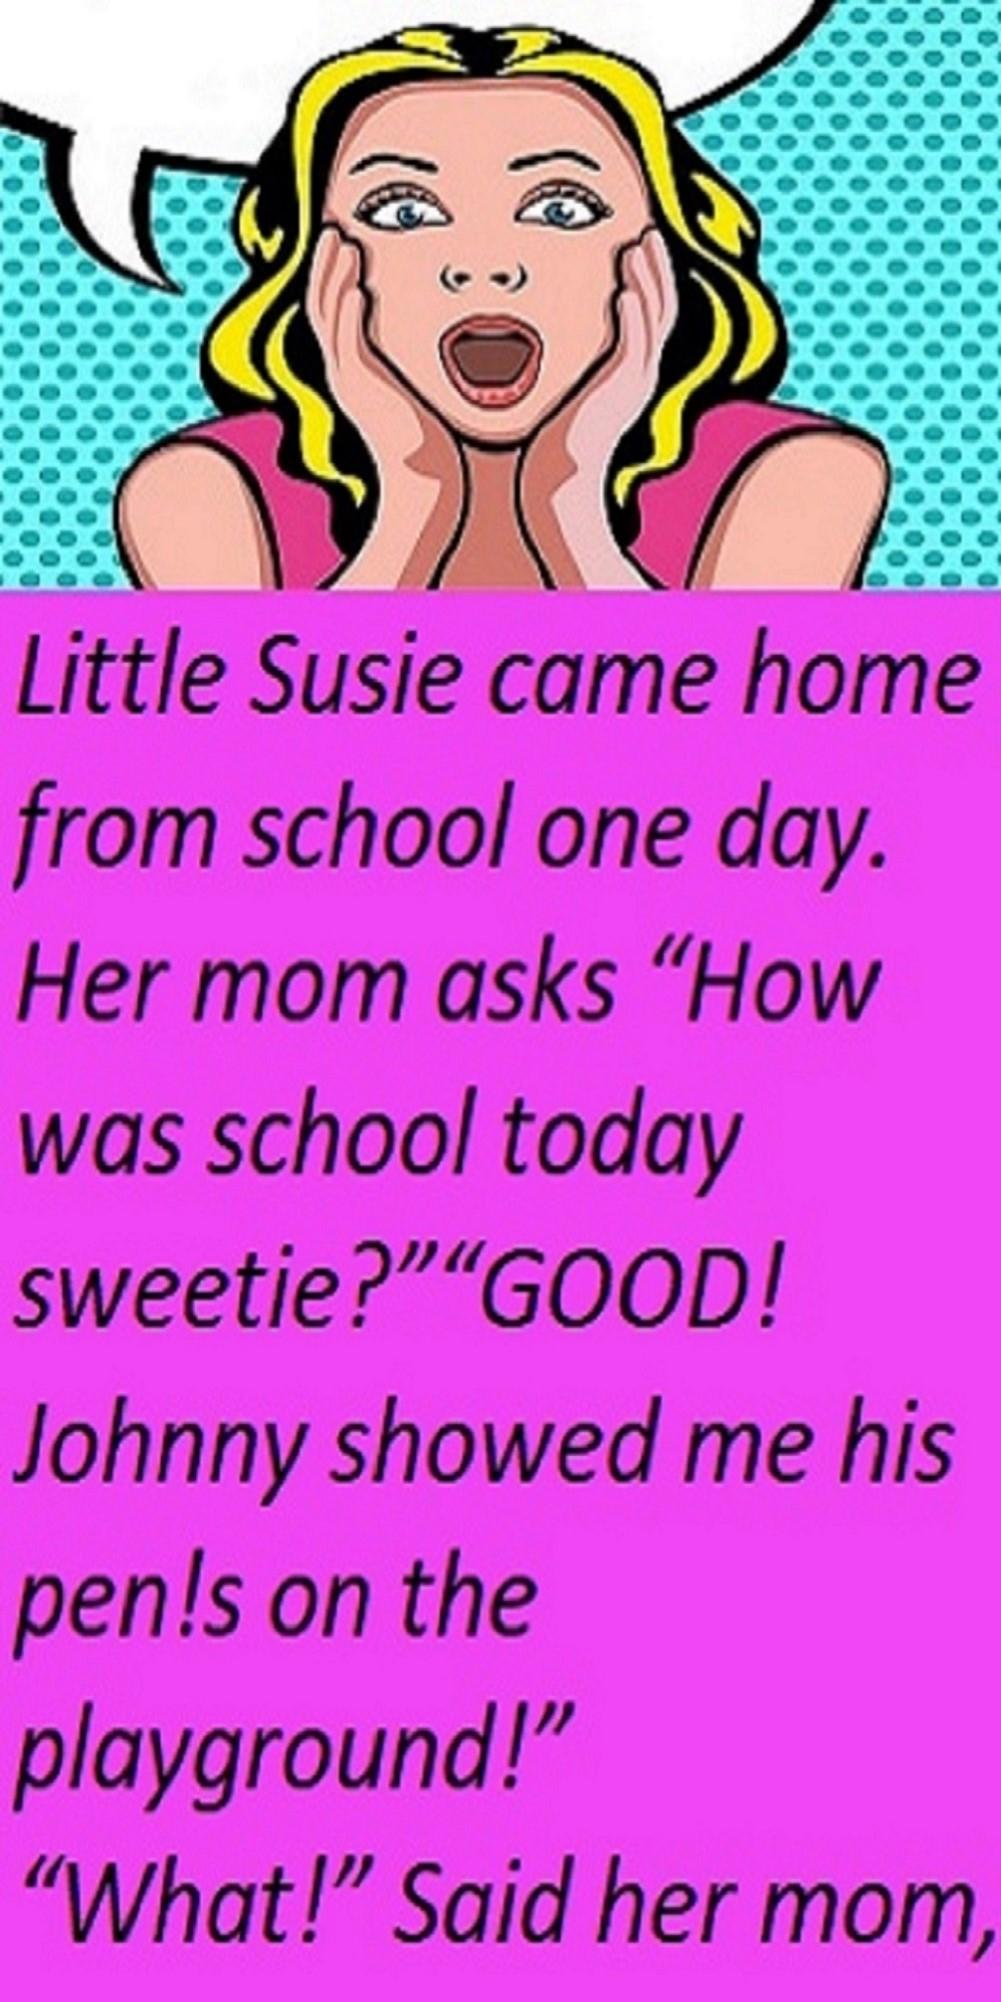 1Susie Came Home From School - Funny Joke